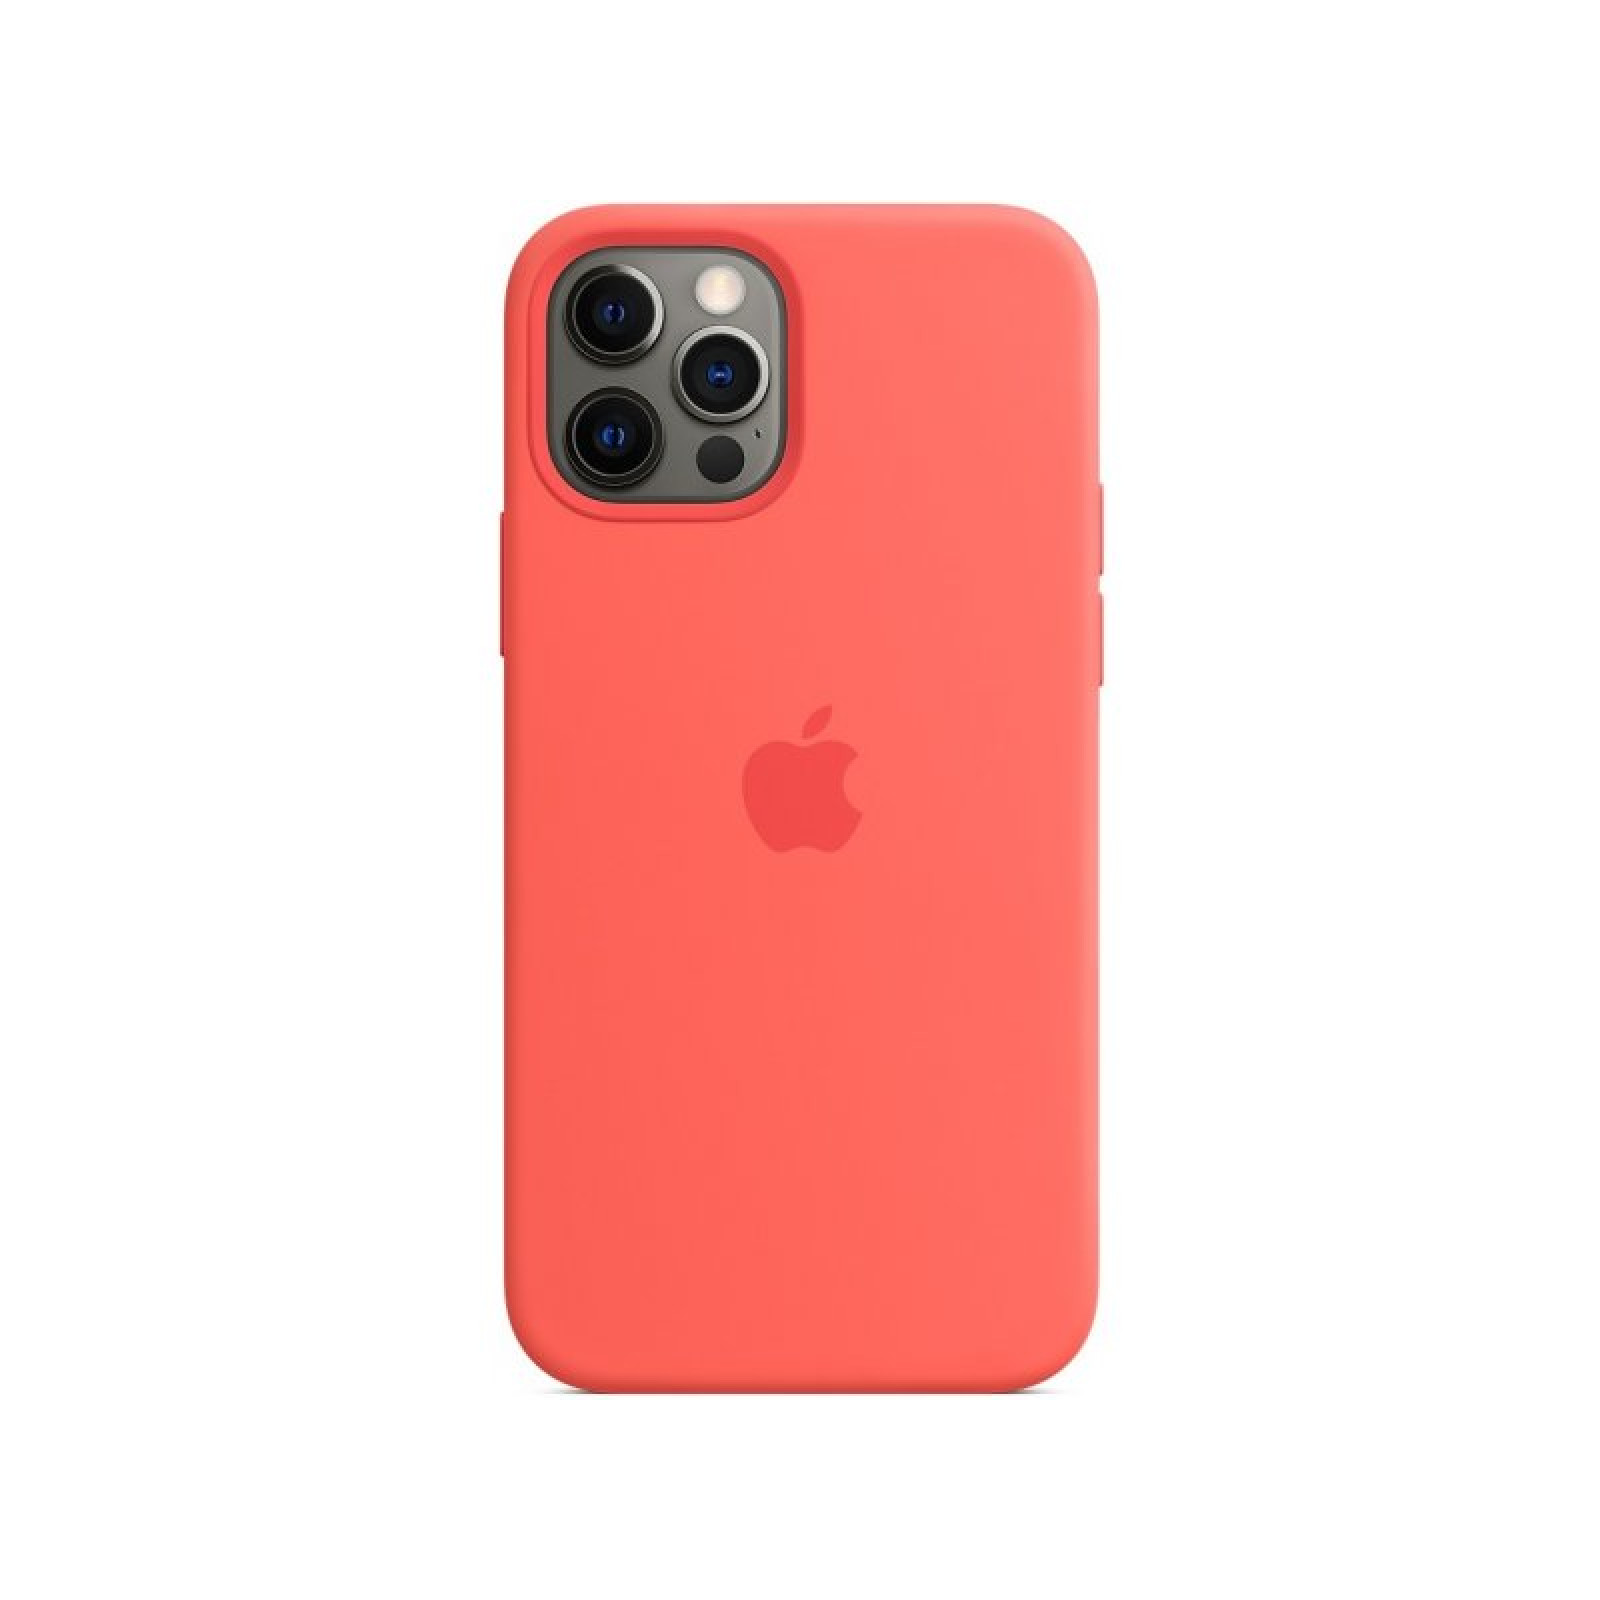 Оригинален гръб Apple Silicone Magsafe Cover за iPhone 12/12 Pro - Pink Citrus, MHL03ZM/A